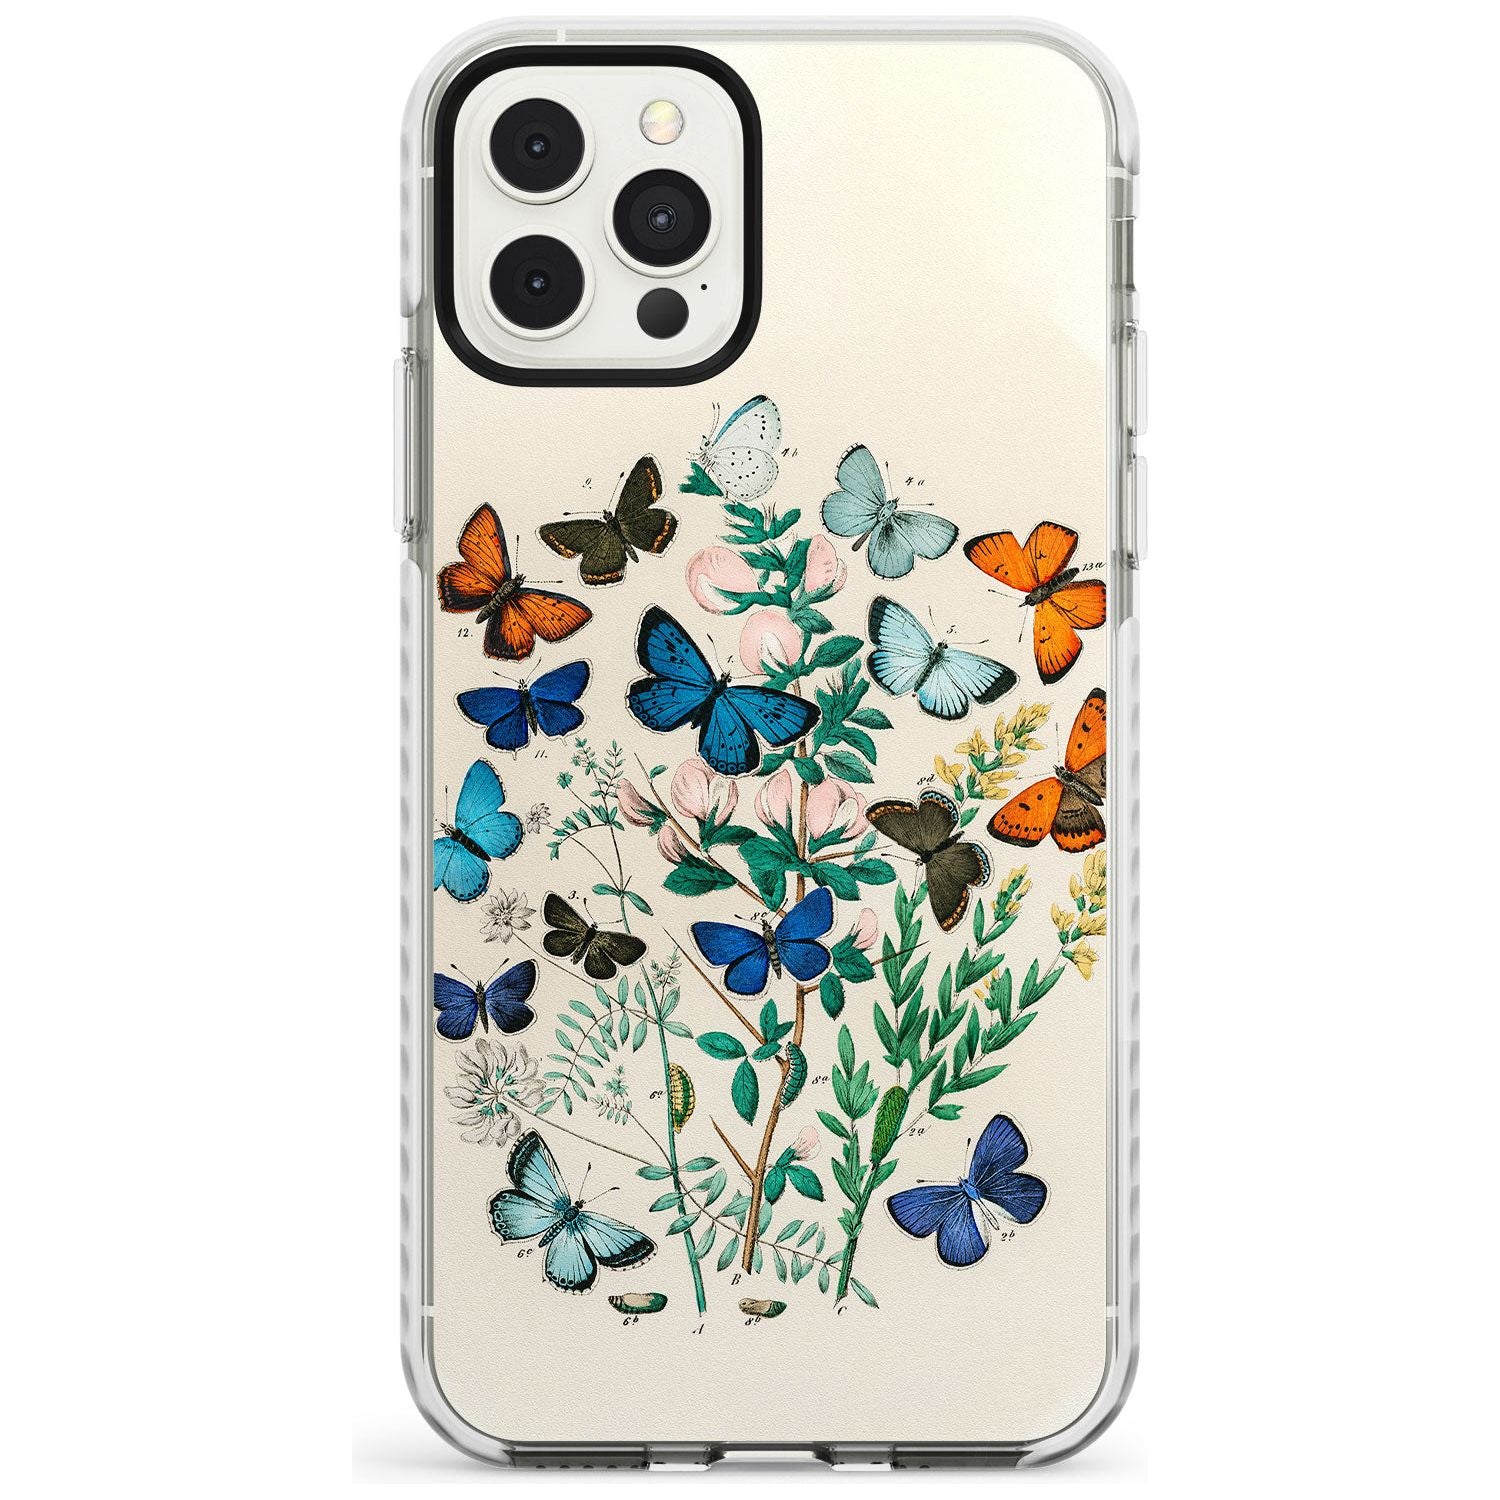 European Butterflies Impact Phone Case for iPhone 11 Pro Max